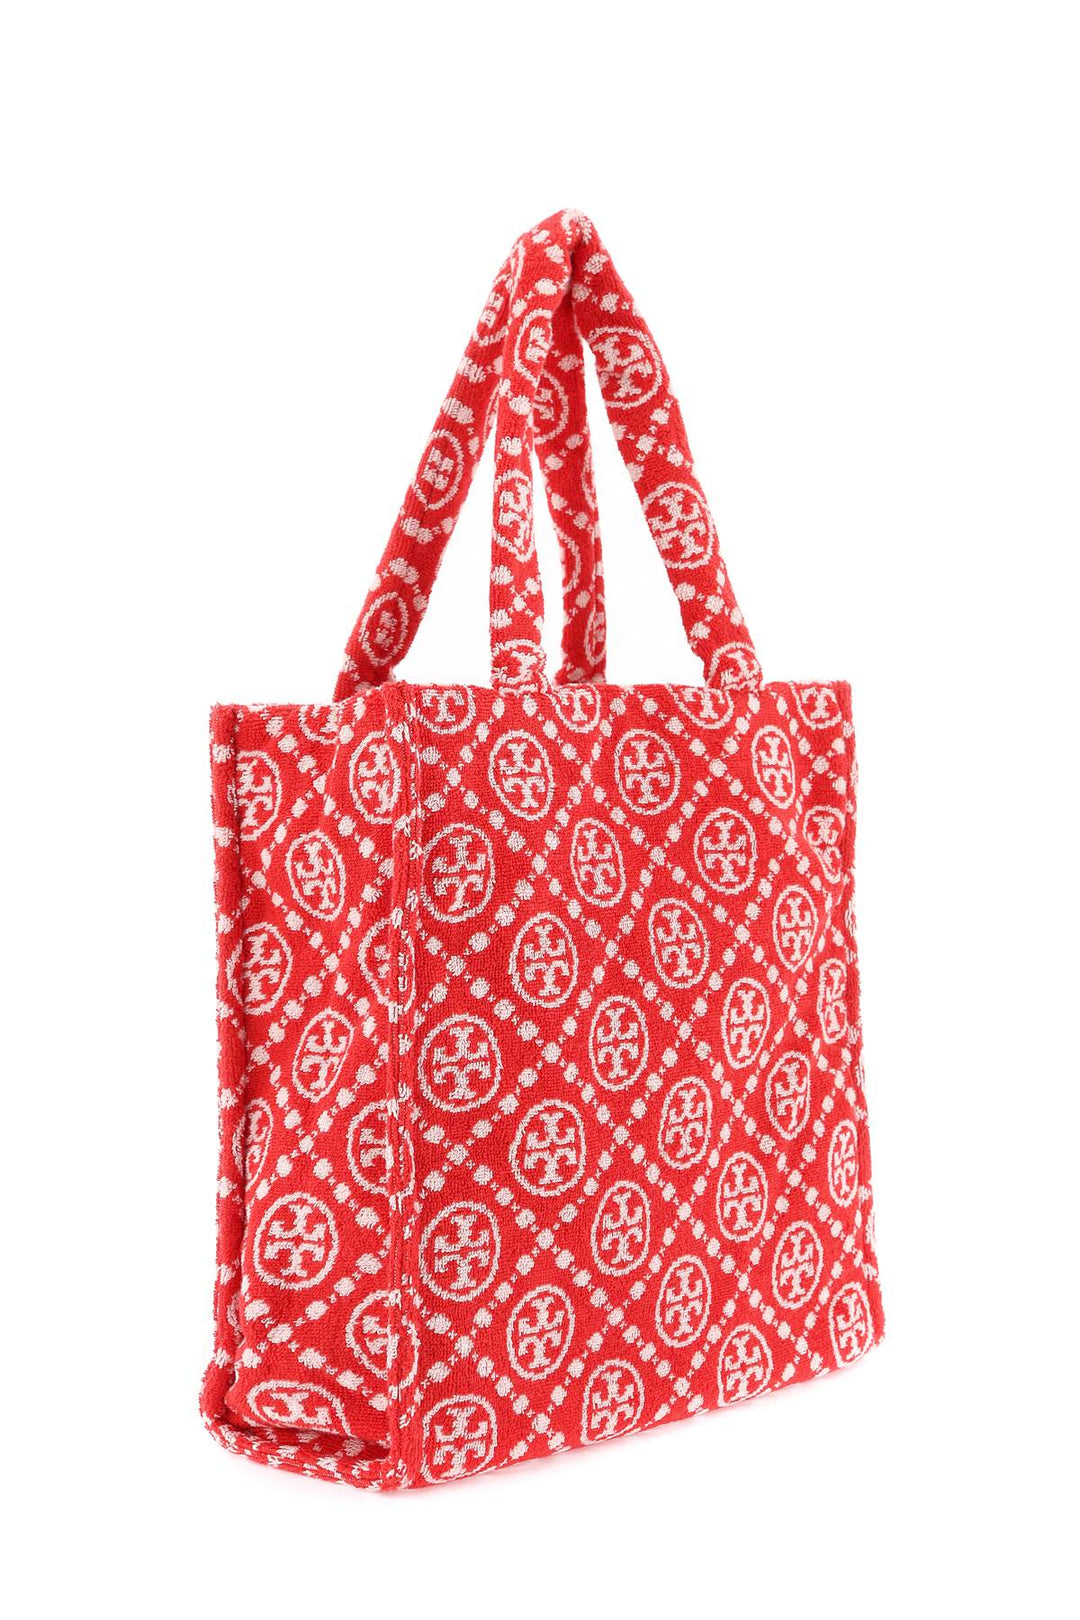 Tory Burch T Monogram Terry Tote Bag   Rosso